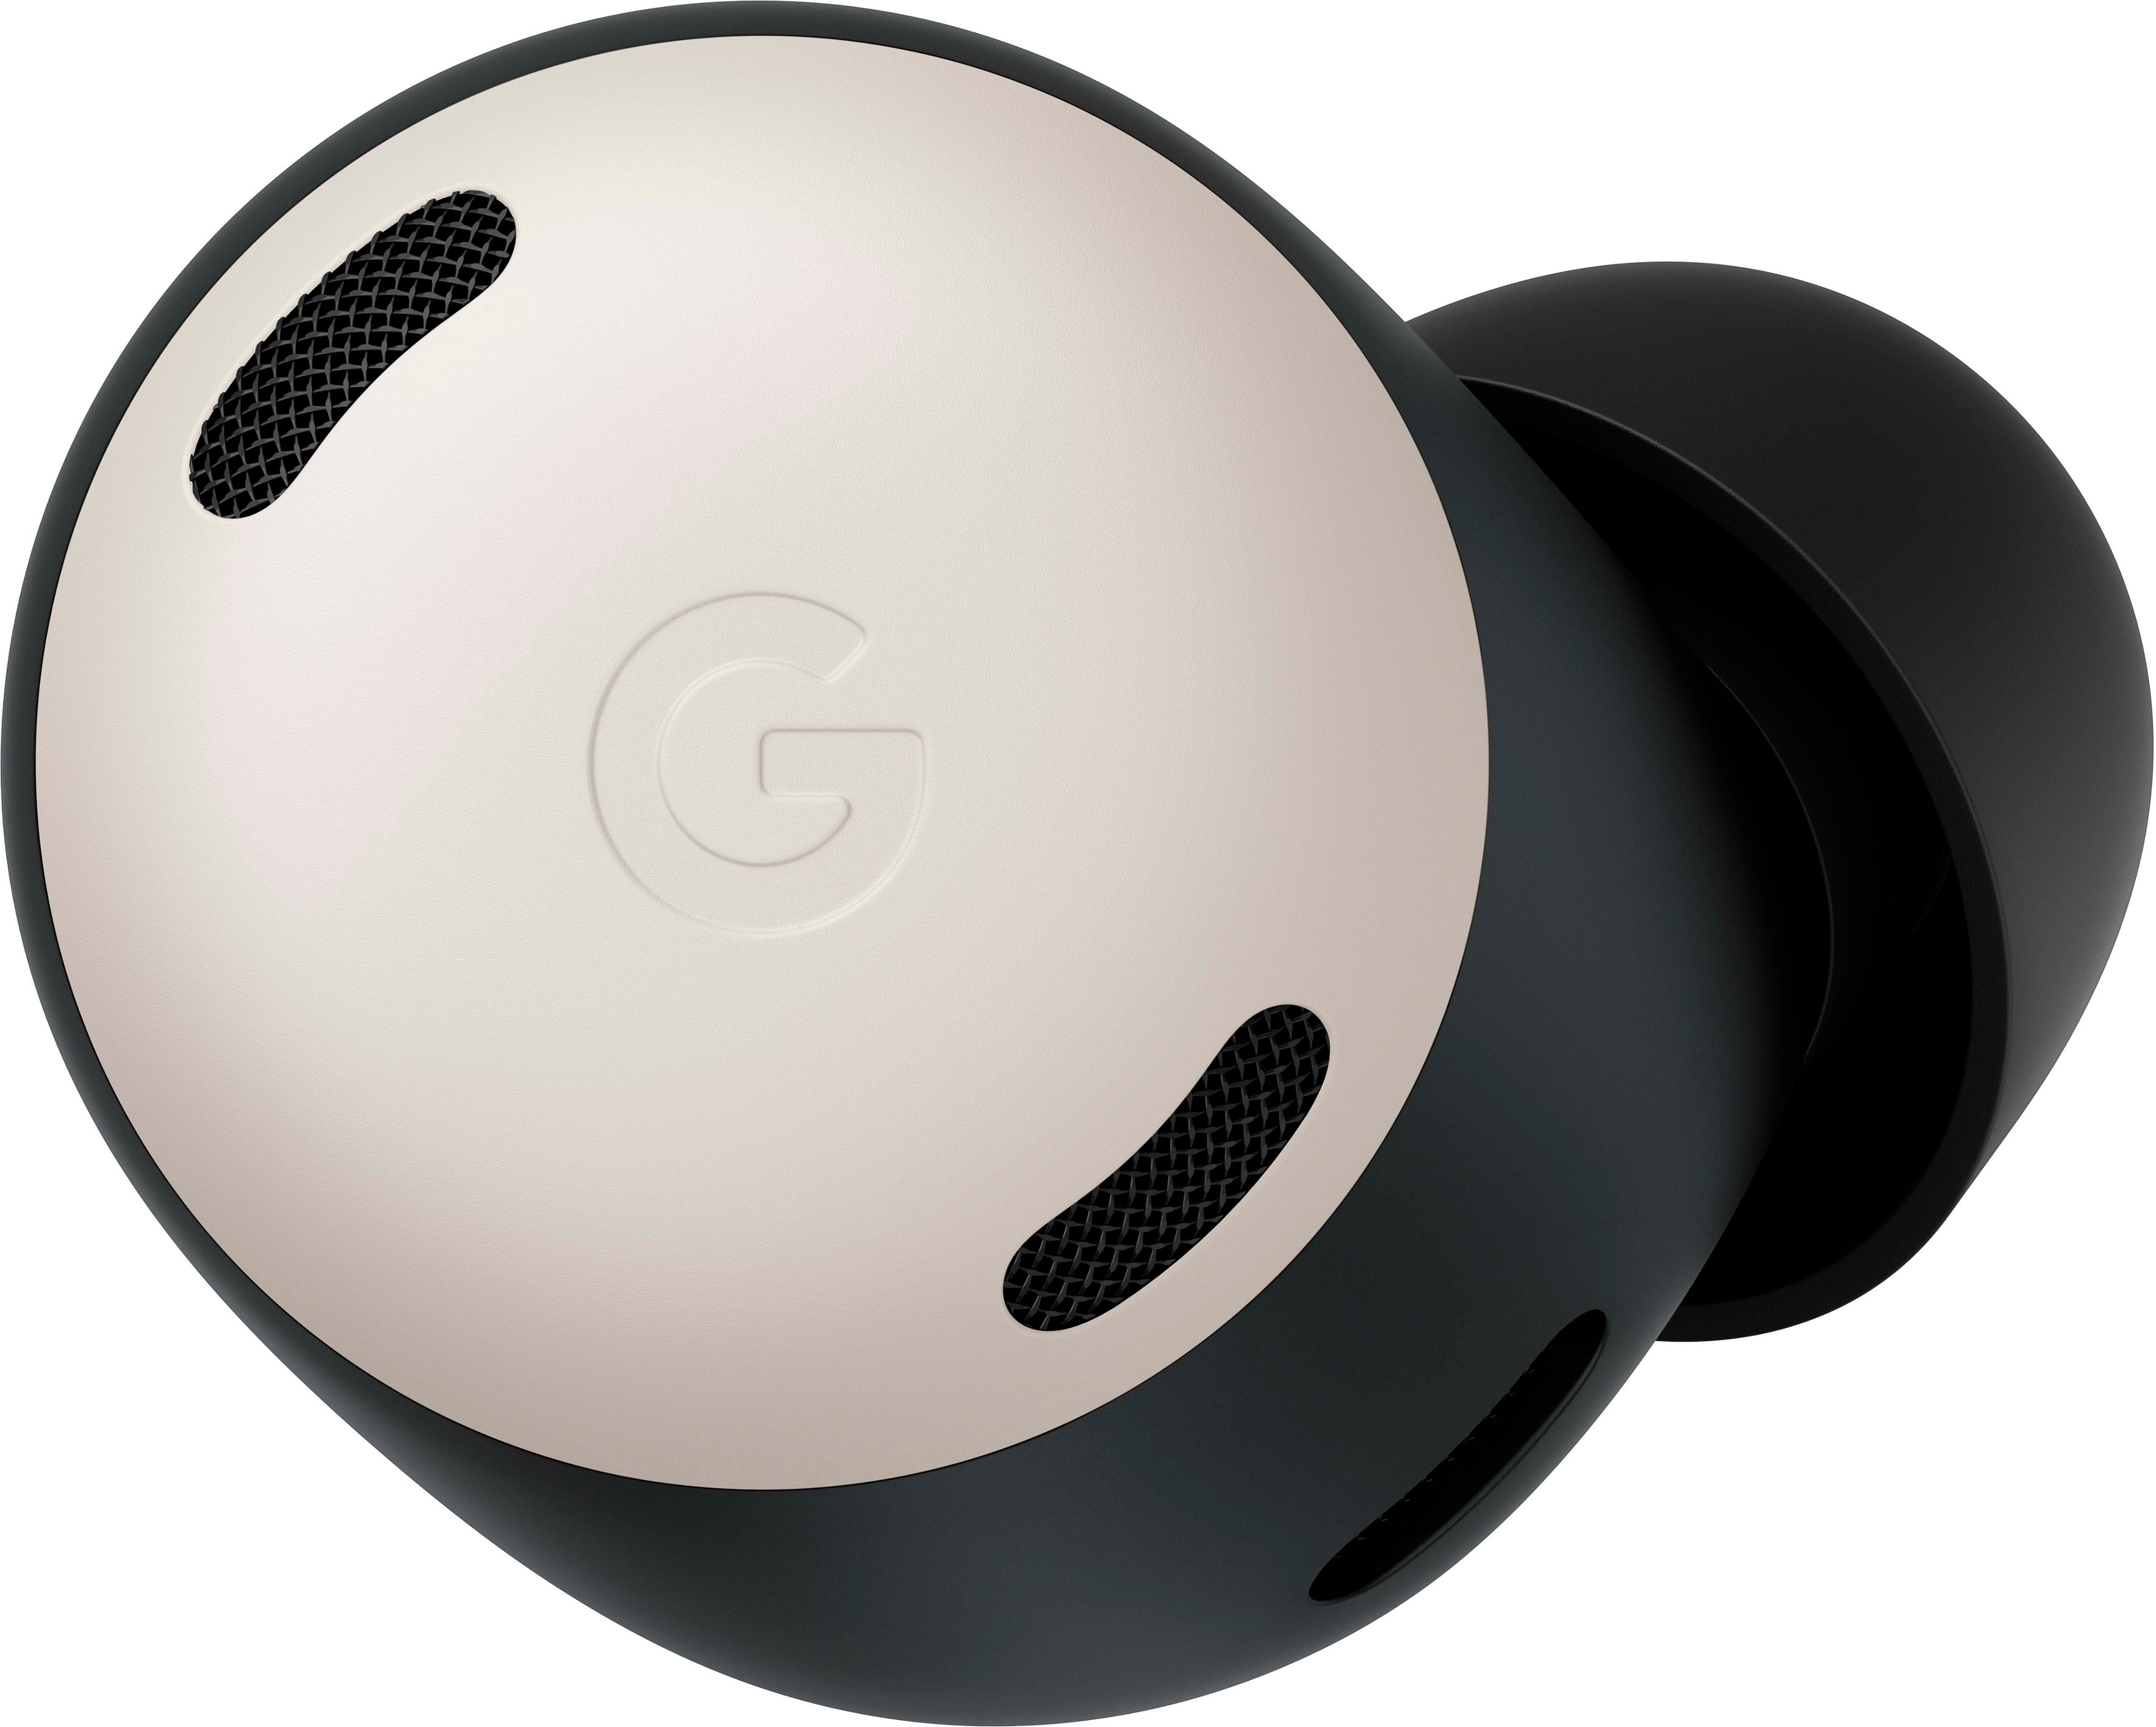 Google Pixel Buds Pro earbuds have active noise cancellation for your ear